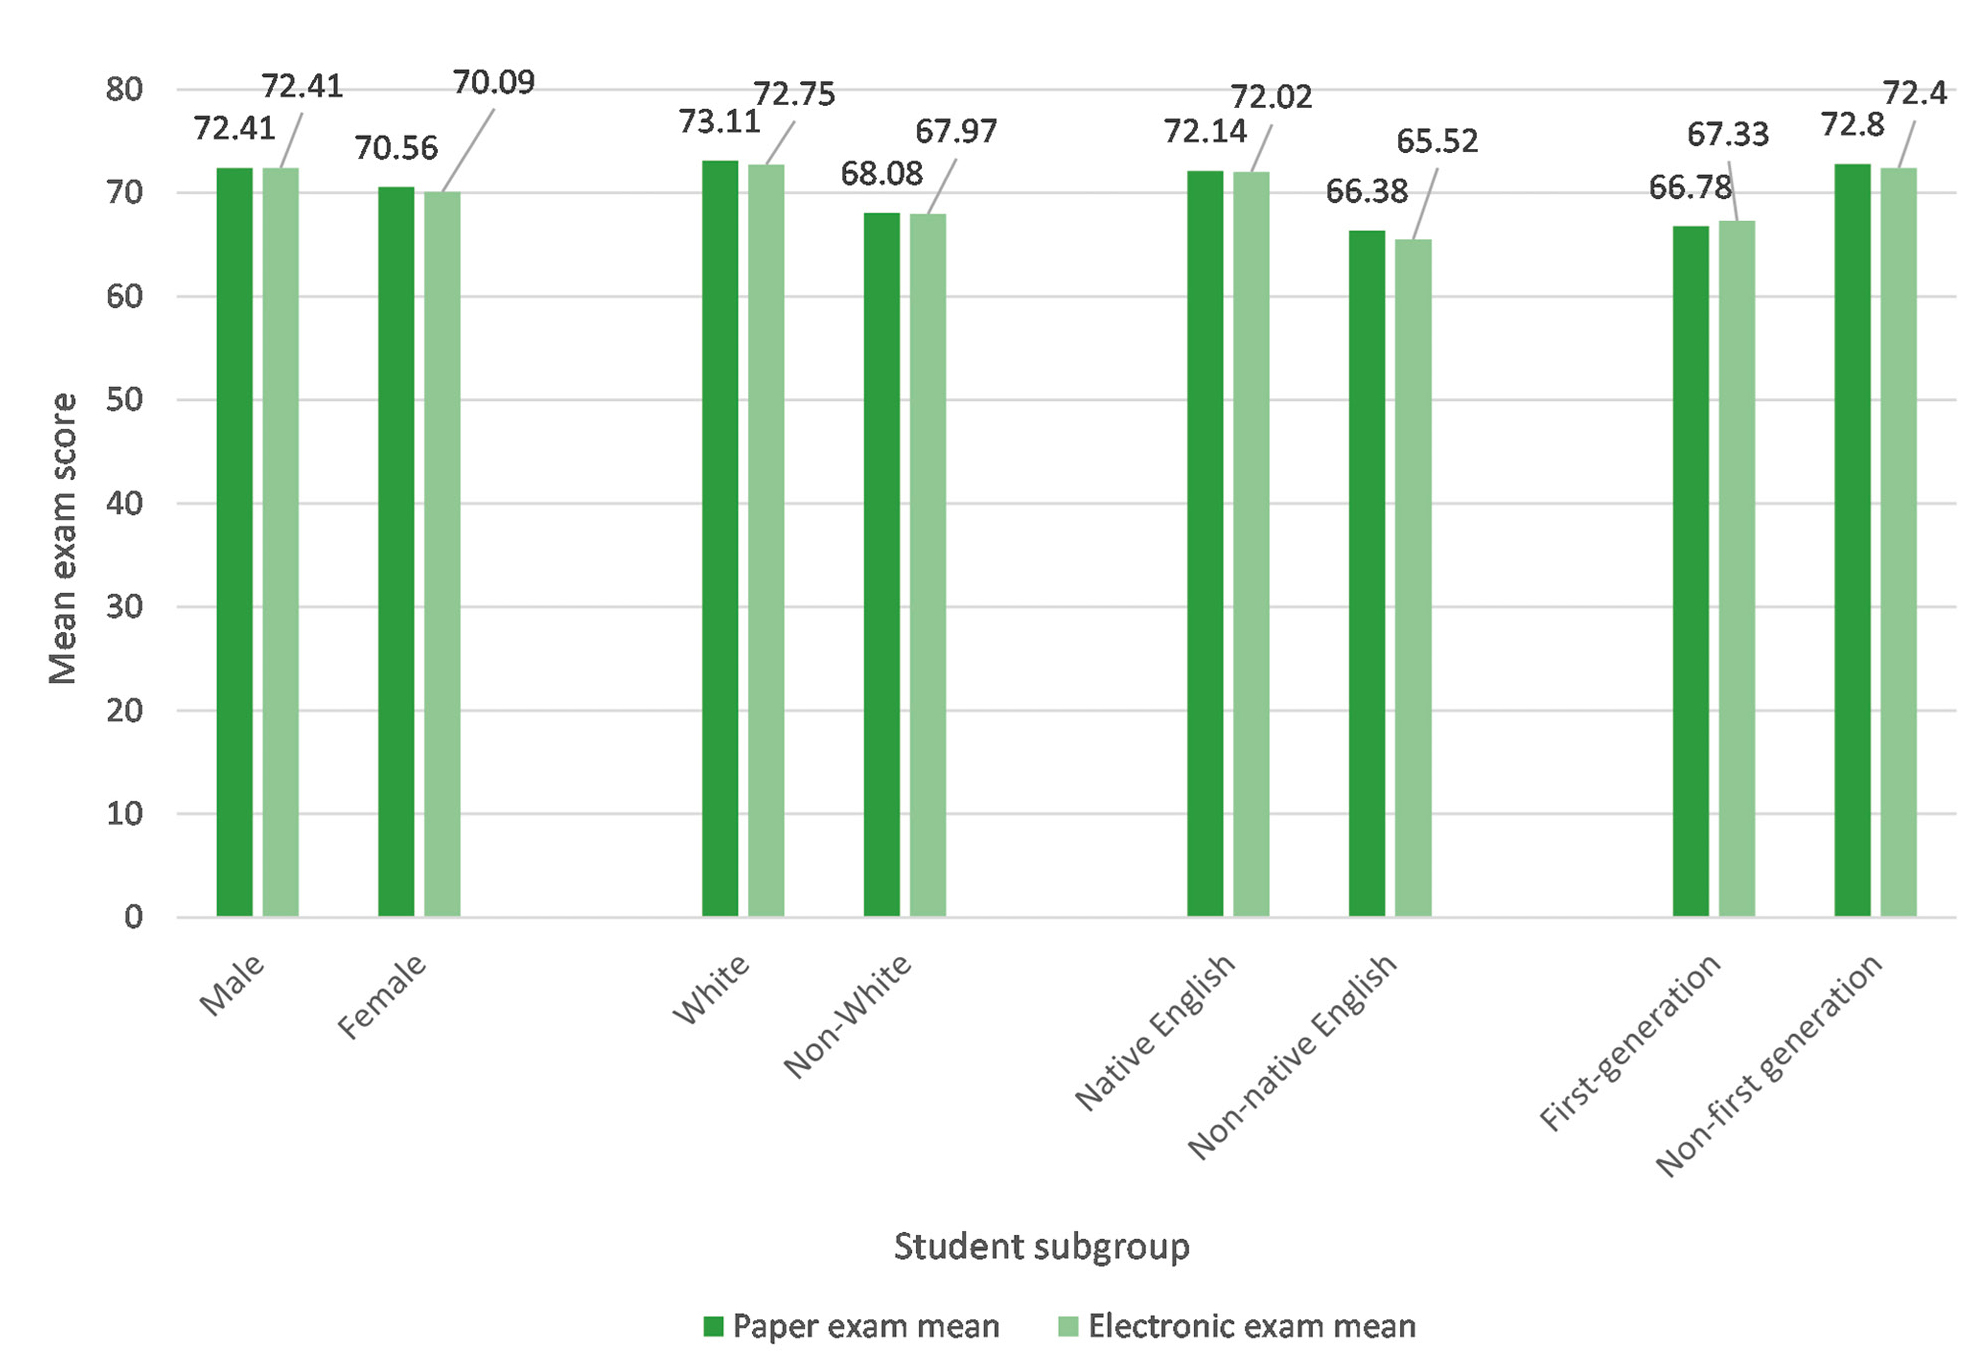 Figure 2 Mean score (out of 85 total points) for different student subgroups. 